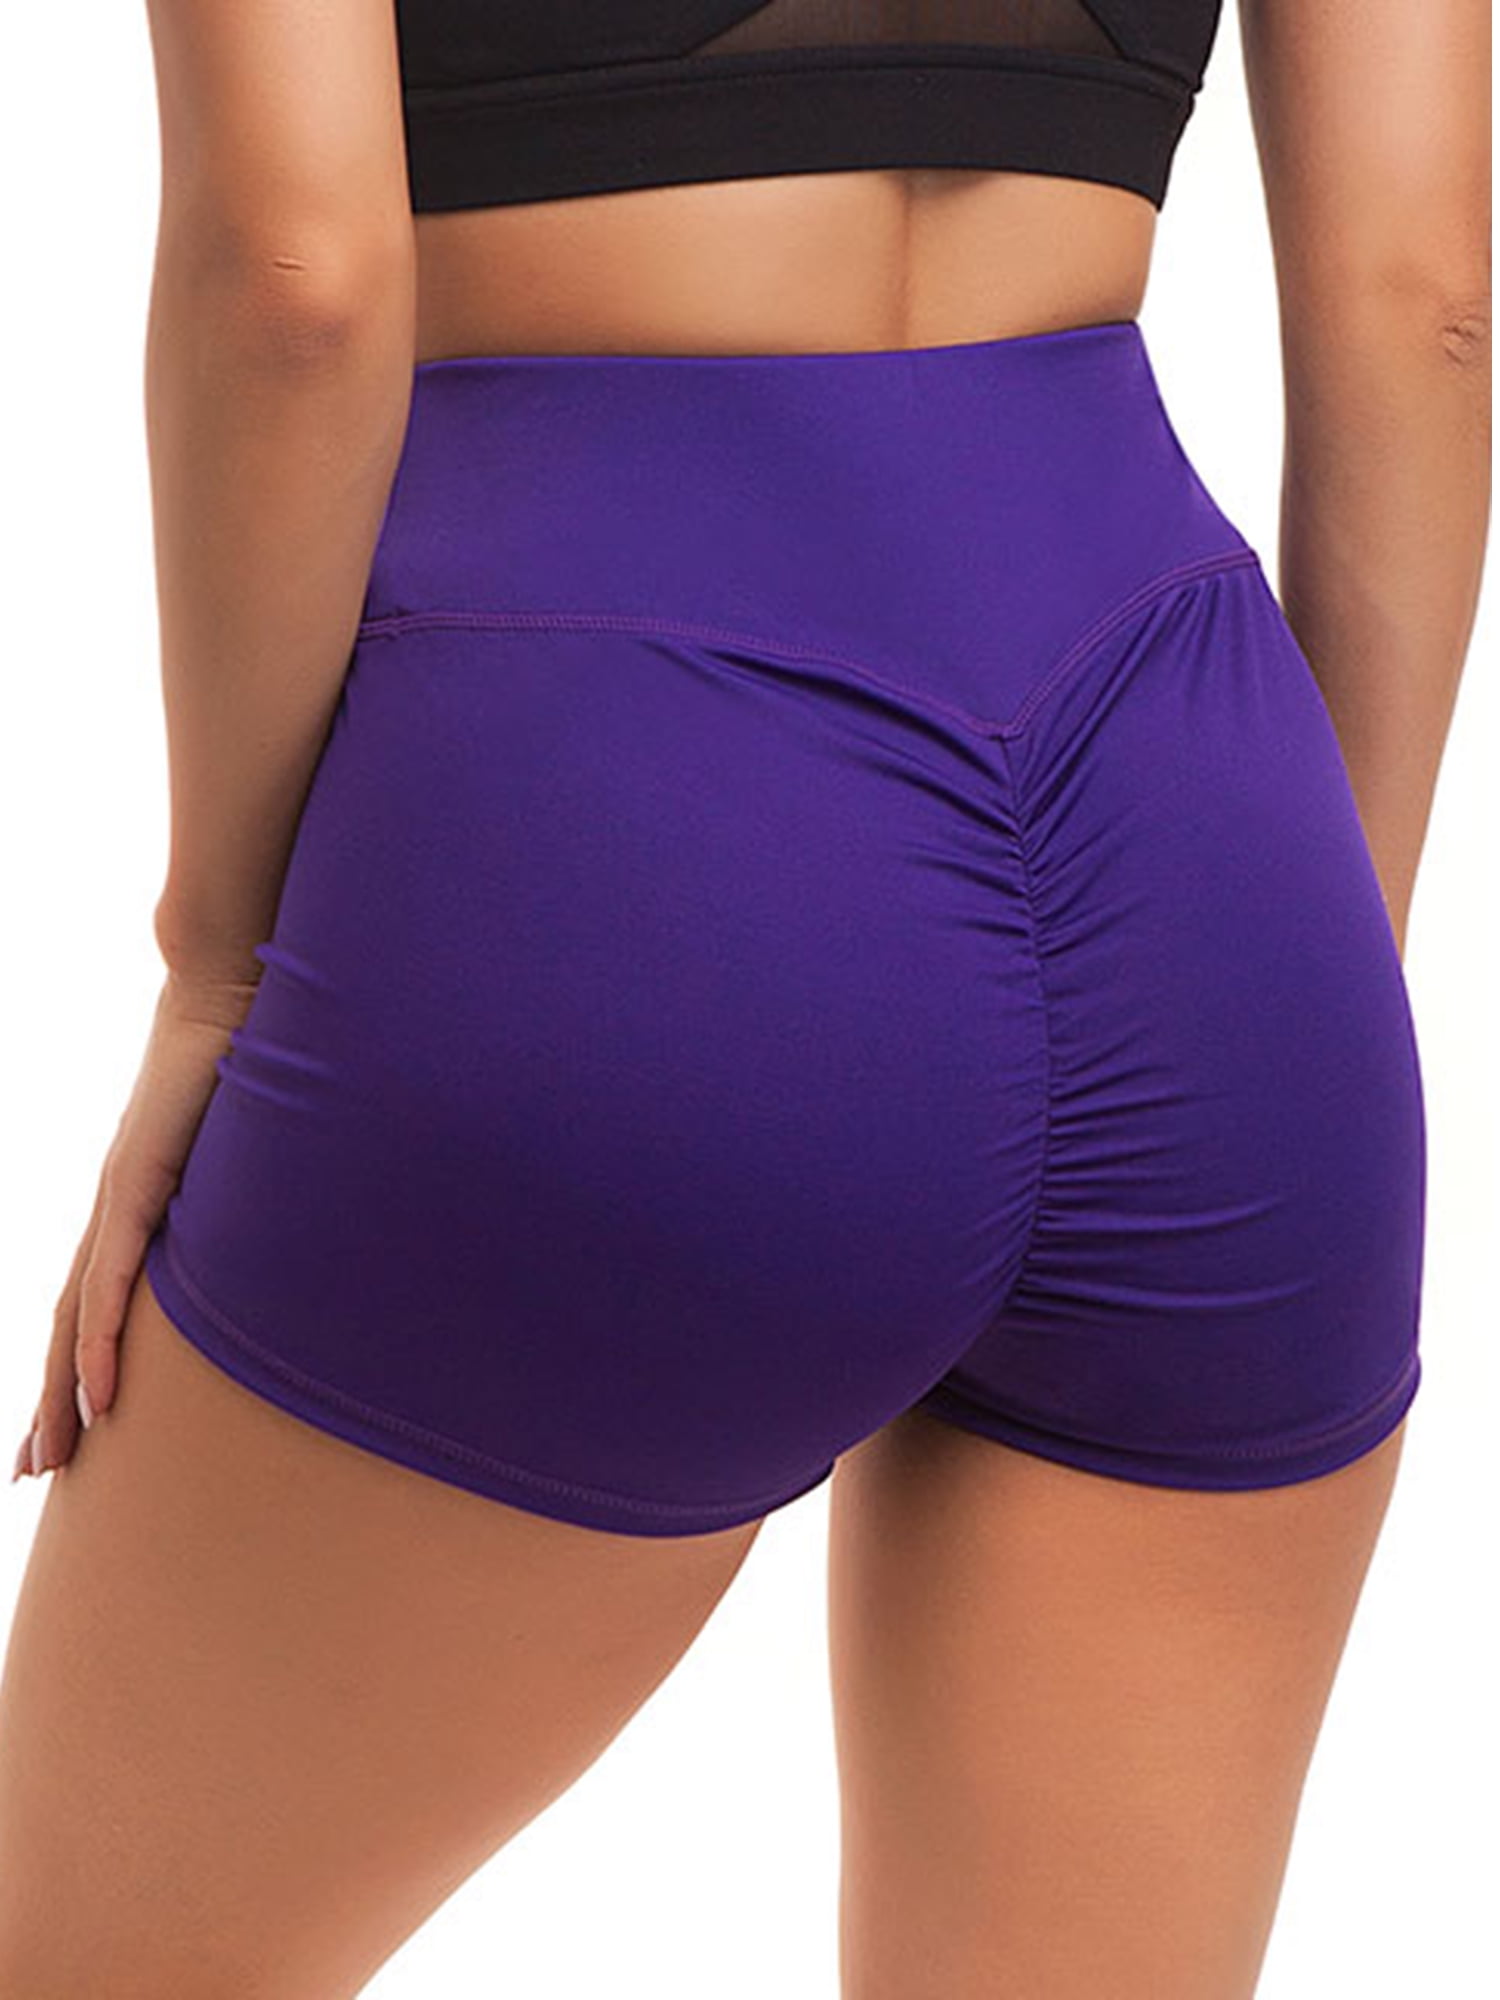 Dainzusyful Yoga Shorts for Women High Waist Sport Fitness Gym Stretchy Ruched Butt Lifting Workout Running Yoga Shorts